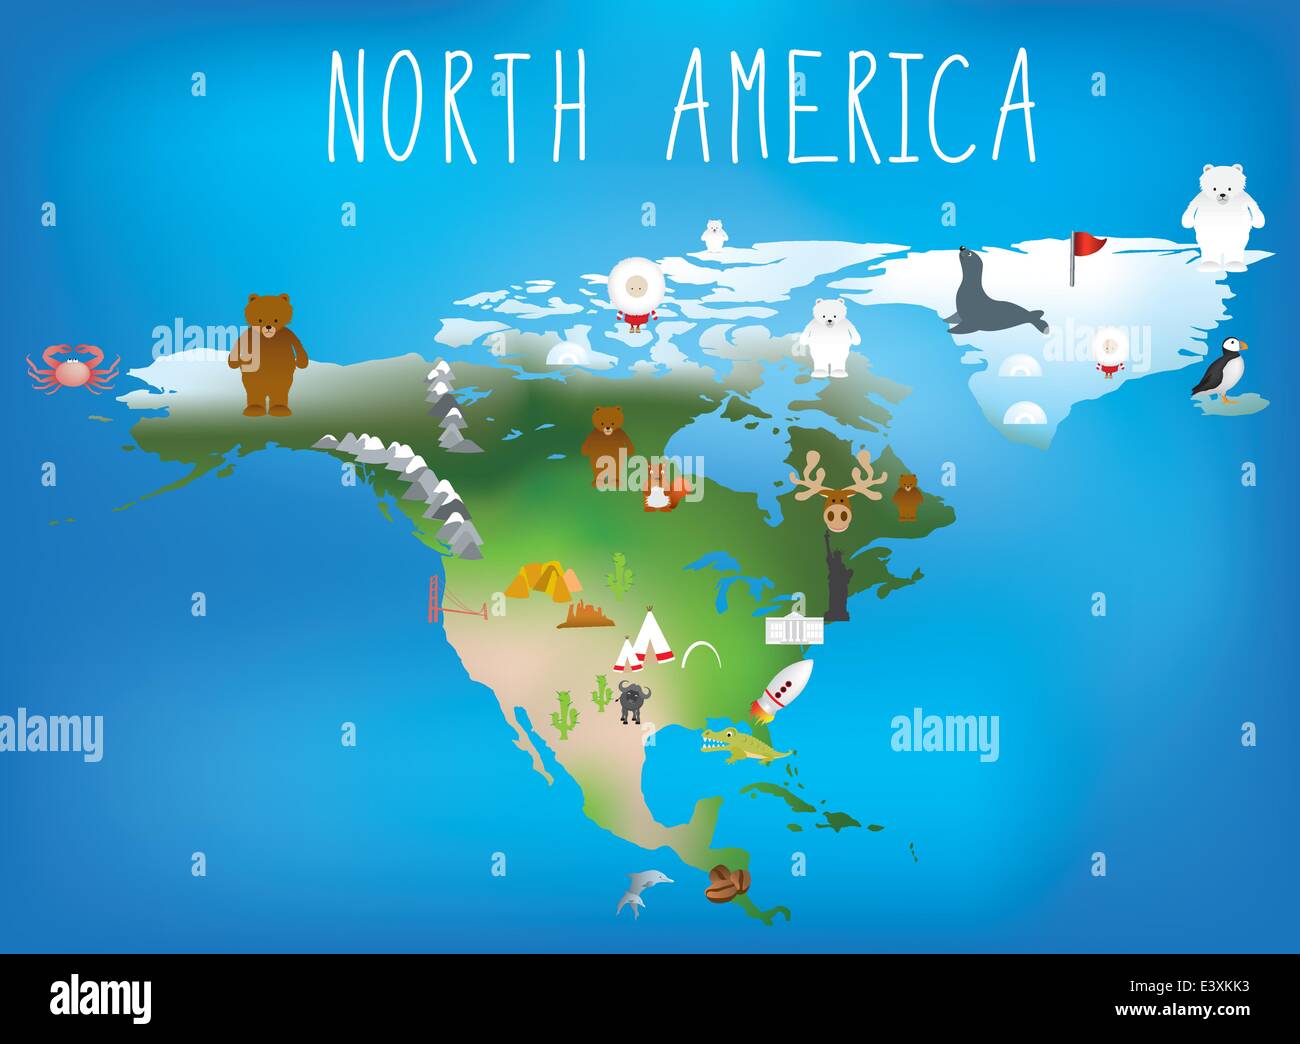 map of north america showing famous landmarks Stock Vector